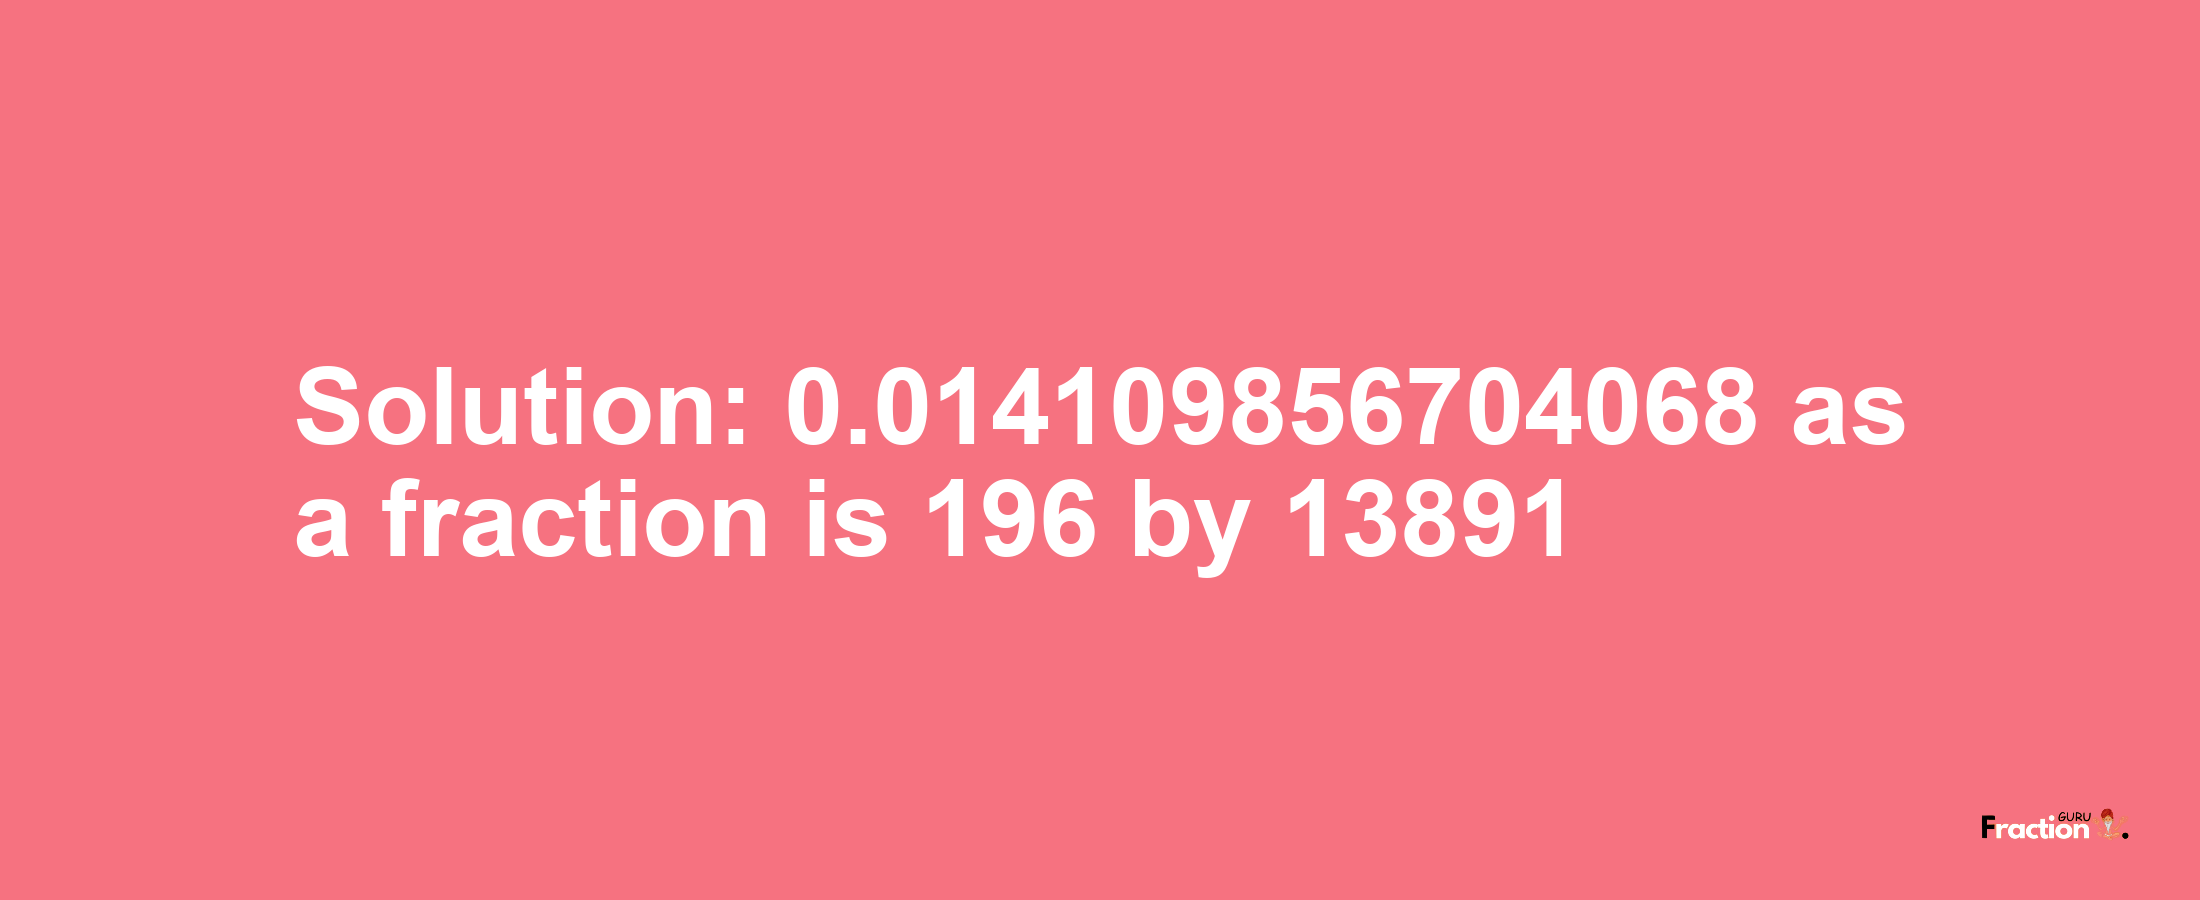 Solution:0.014109856704068 as a fraction is 196/13891